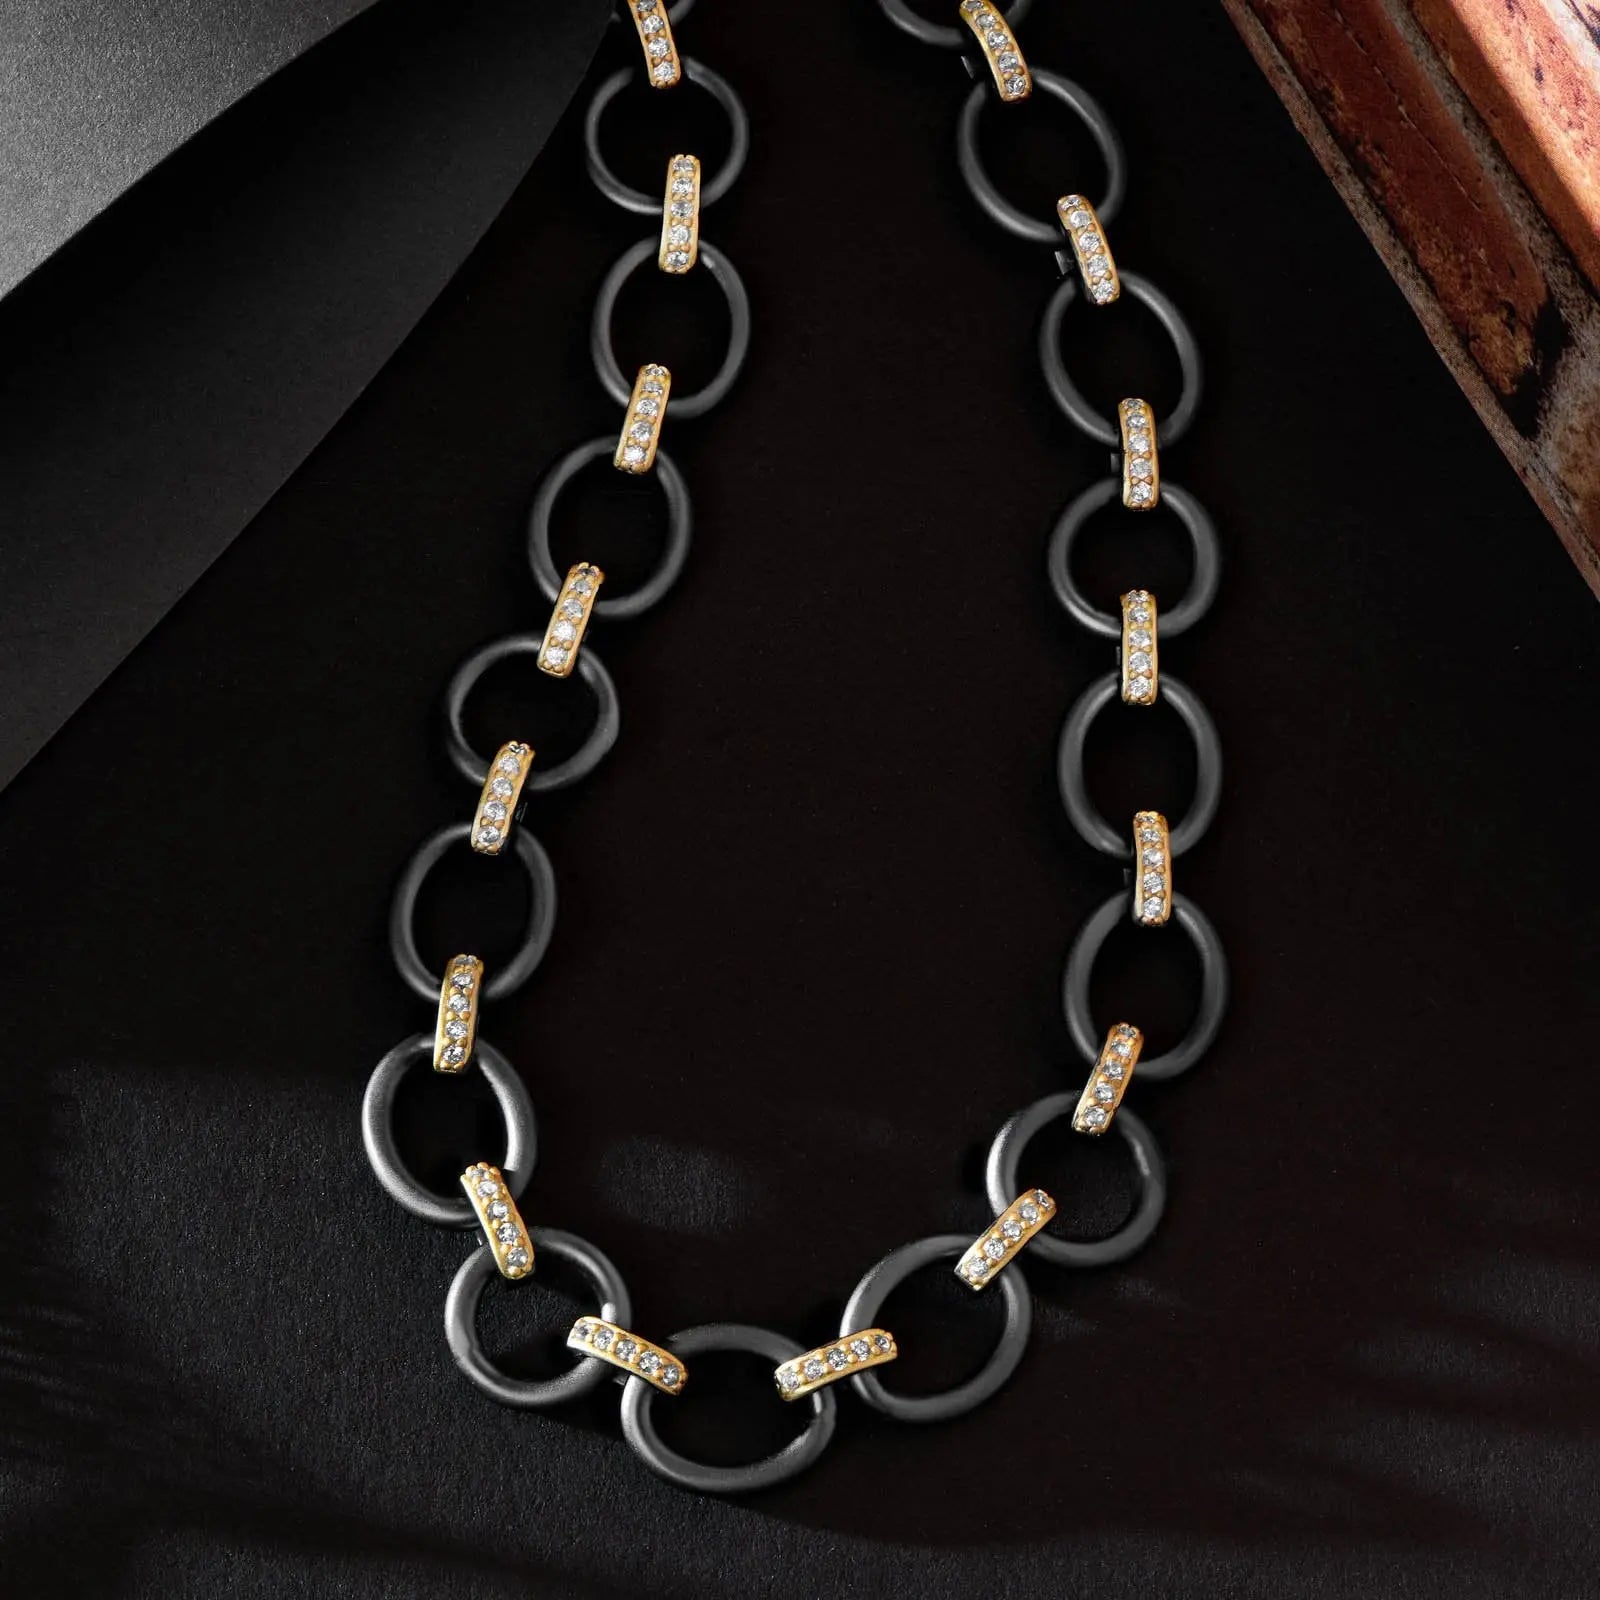 Chunky chain link necklace - RzJewelryDesign